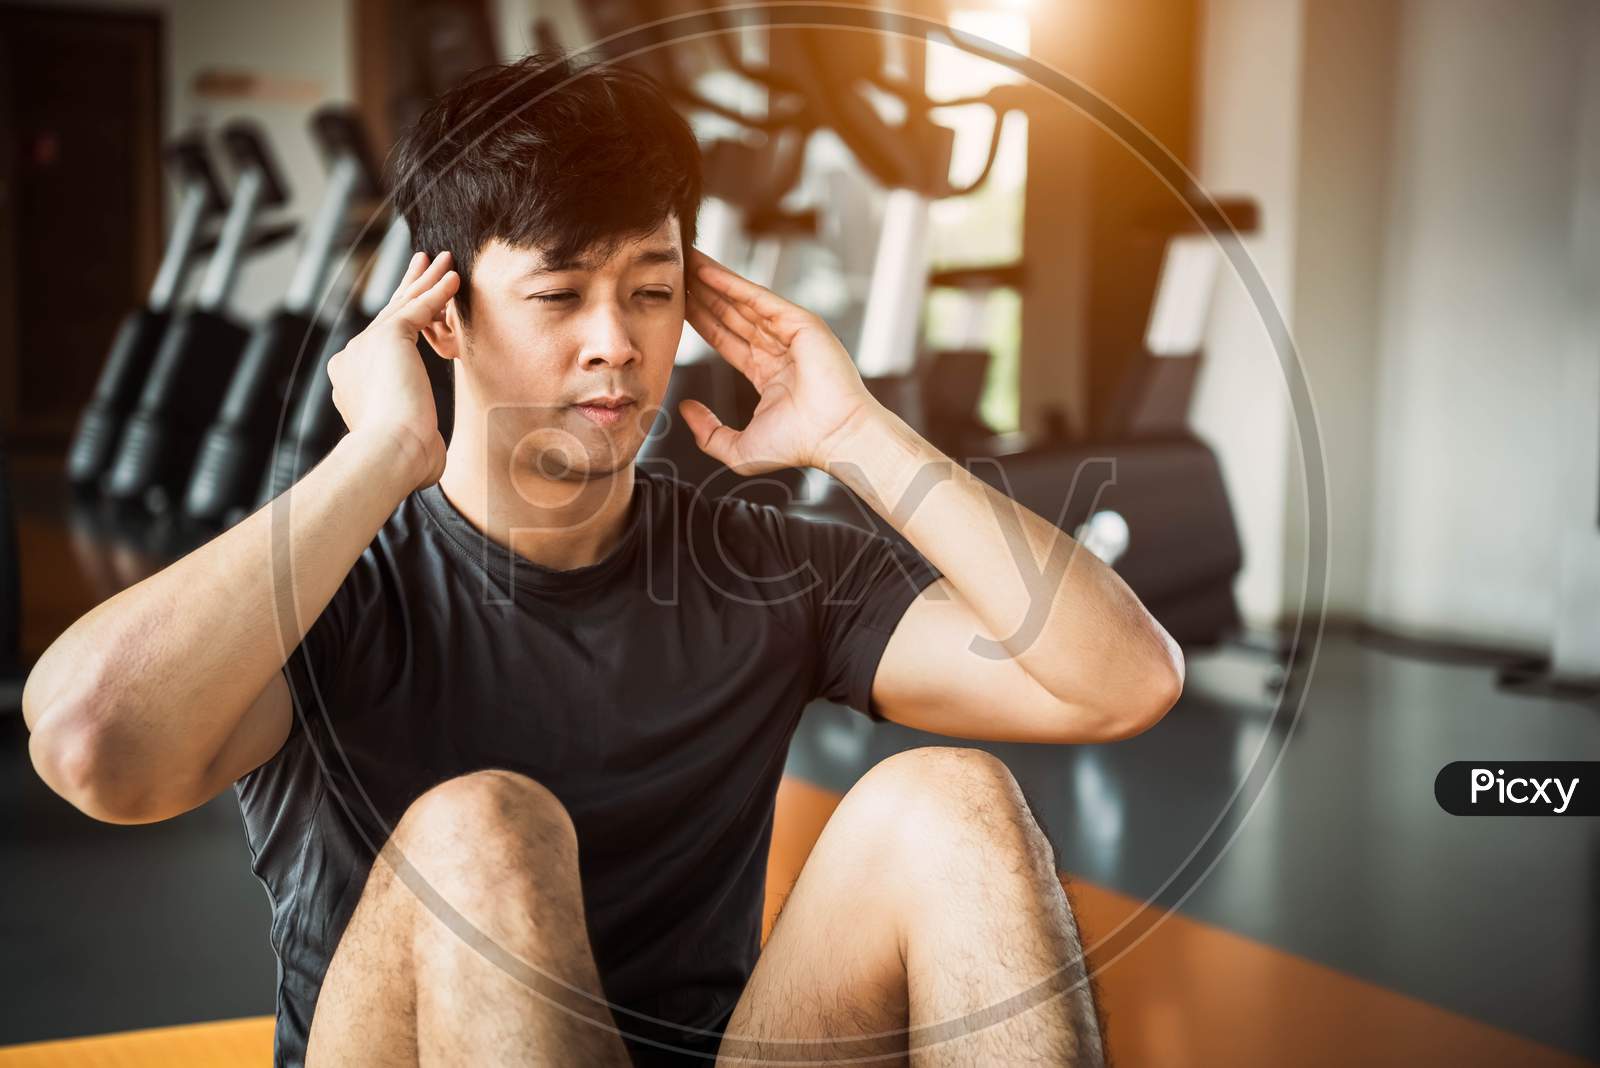 Asian Sport Man Doing Crunch Or Sit Up Posture On Yoga Mat In Fitness Gym At Condominium With Gym Equipment Background. Office Working People Lifestyles And Sport Workout Concept.